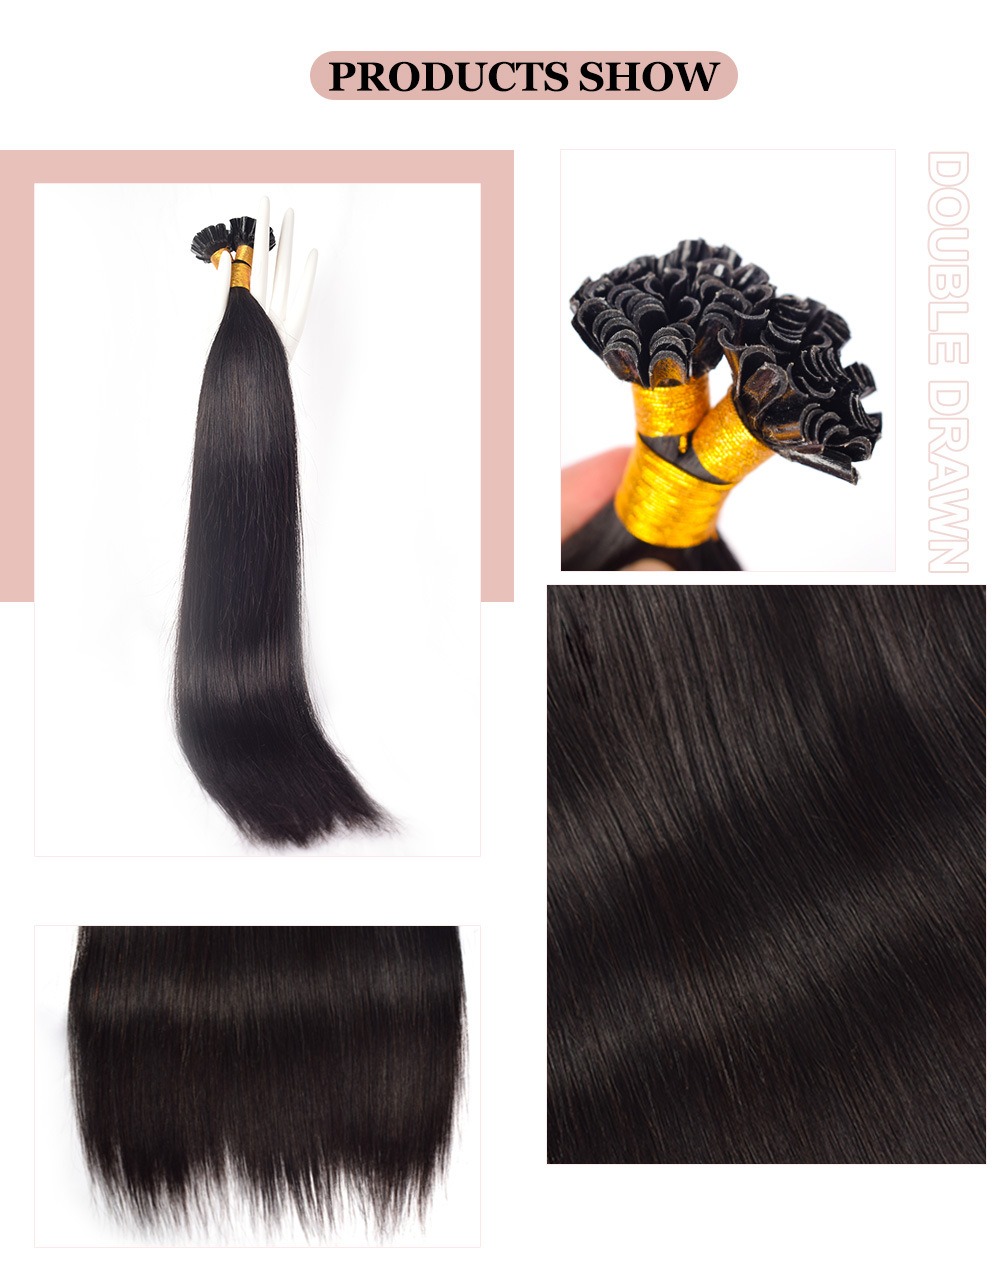 Undergo an invisible transformation with our U-tip hair extensions, meticulously crafted from human hair for sublime glamour and a seamless enhancement of your natural beauty